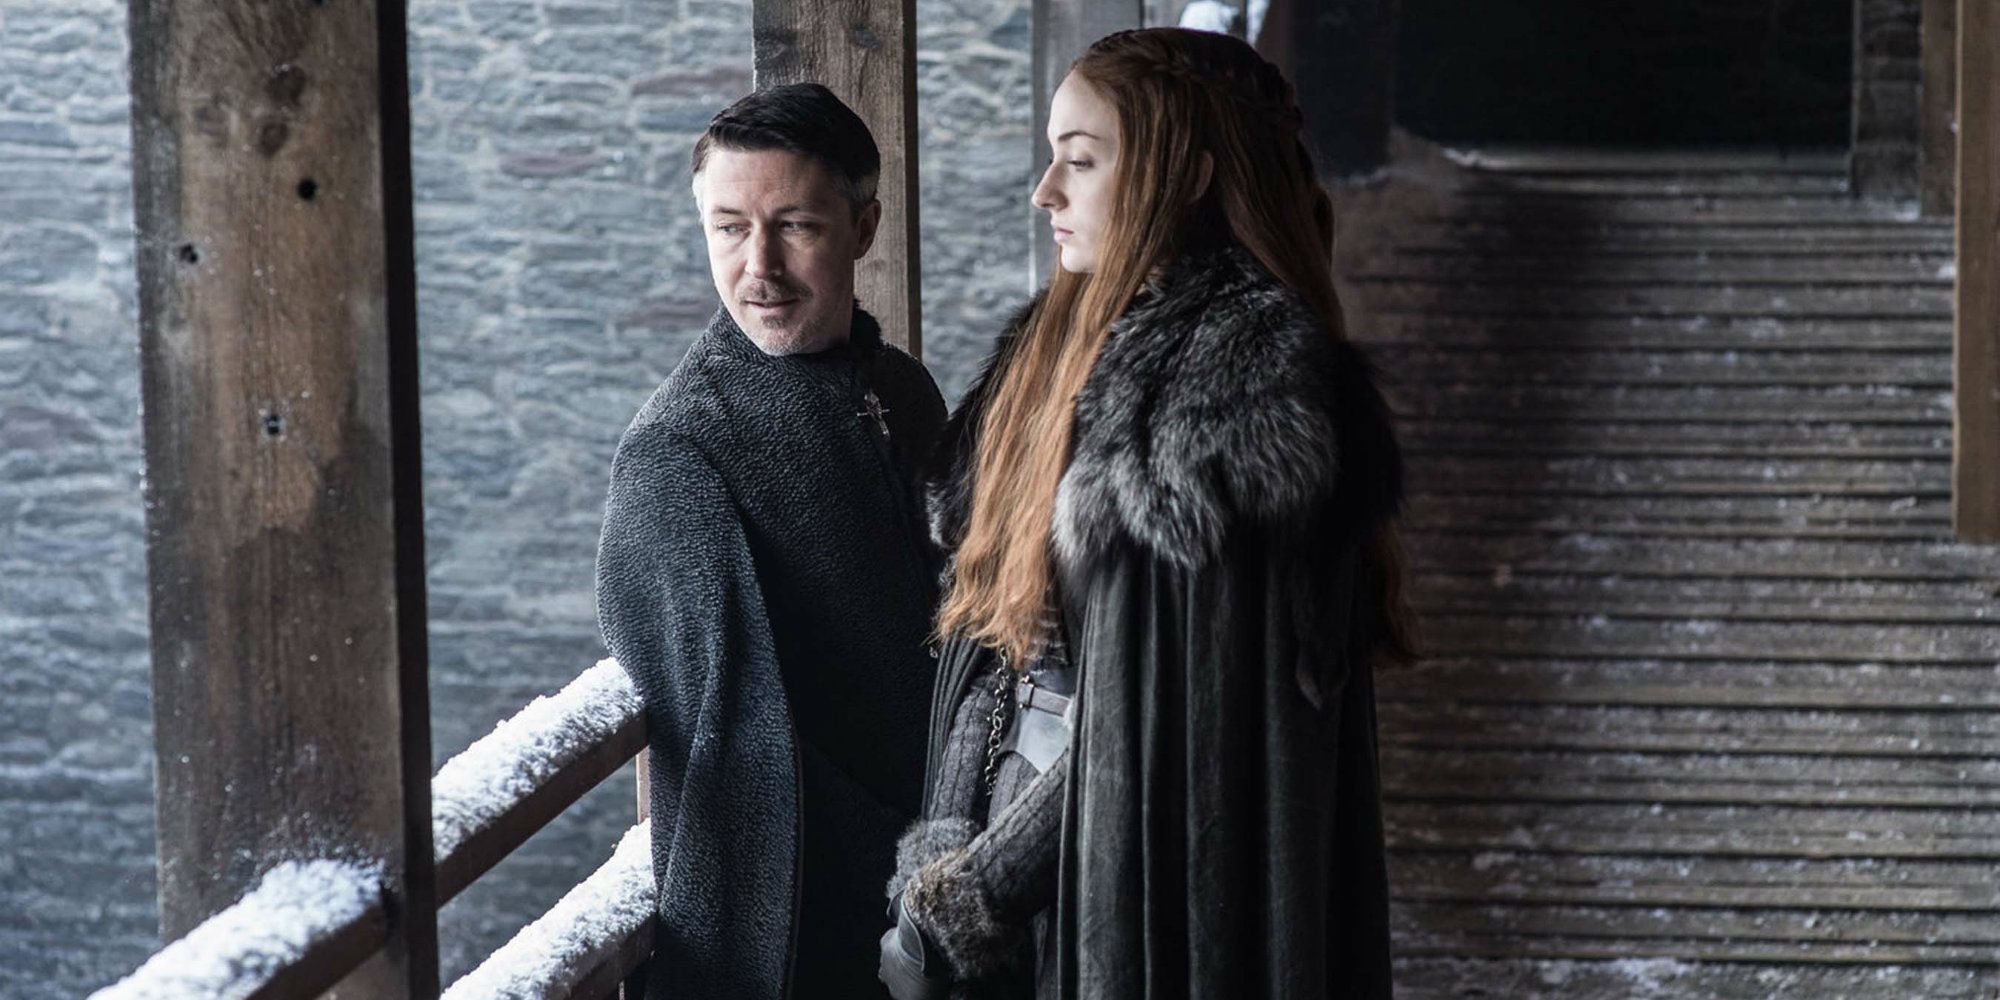 Littlefinger with Sansa at the Winterfell battlements in Game of Thrones.